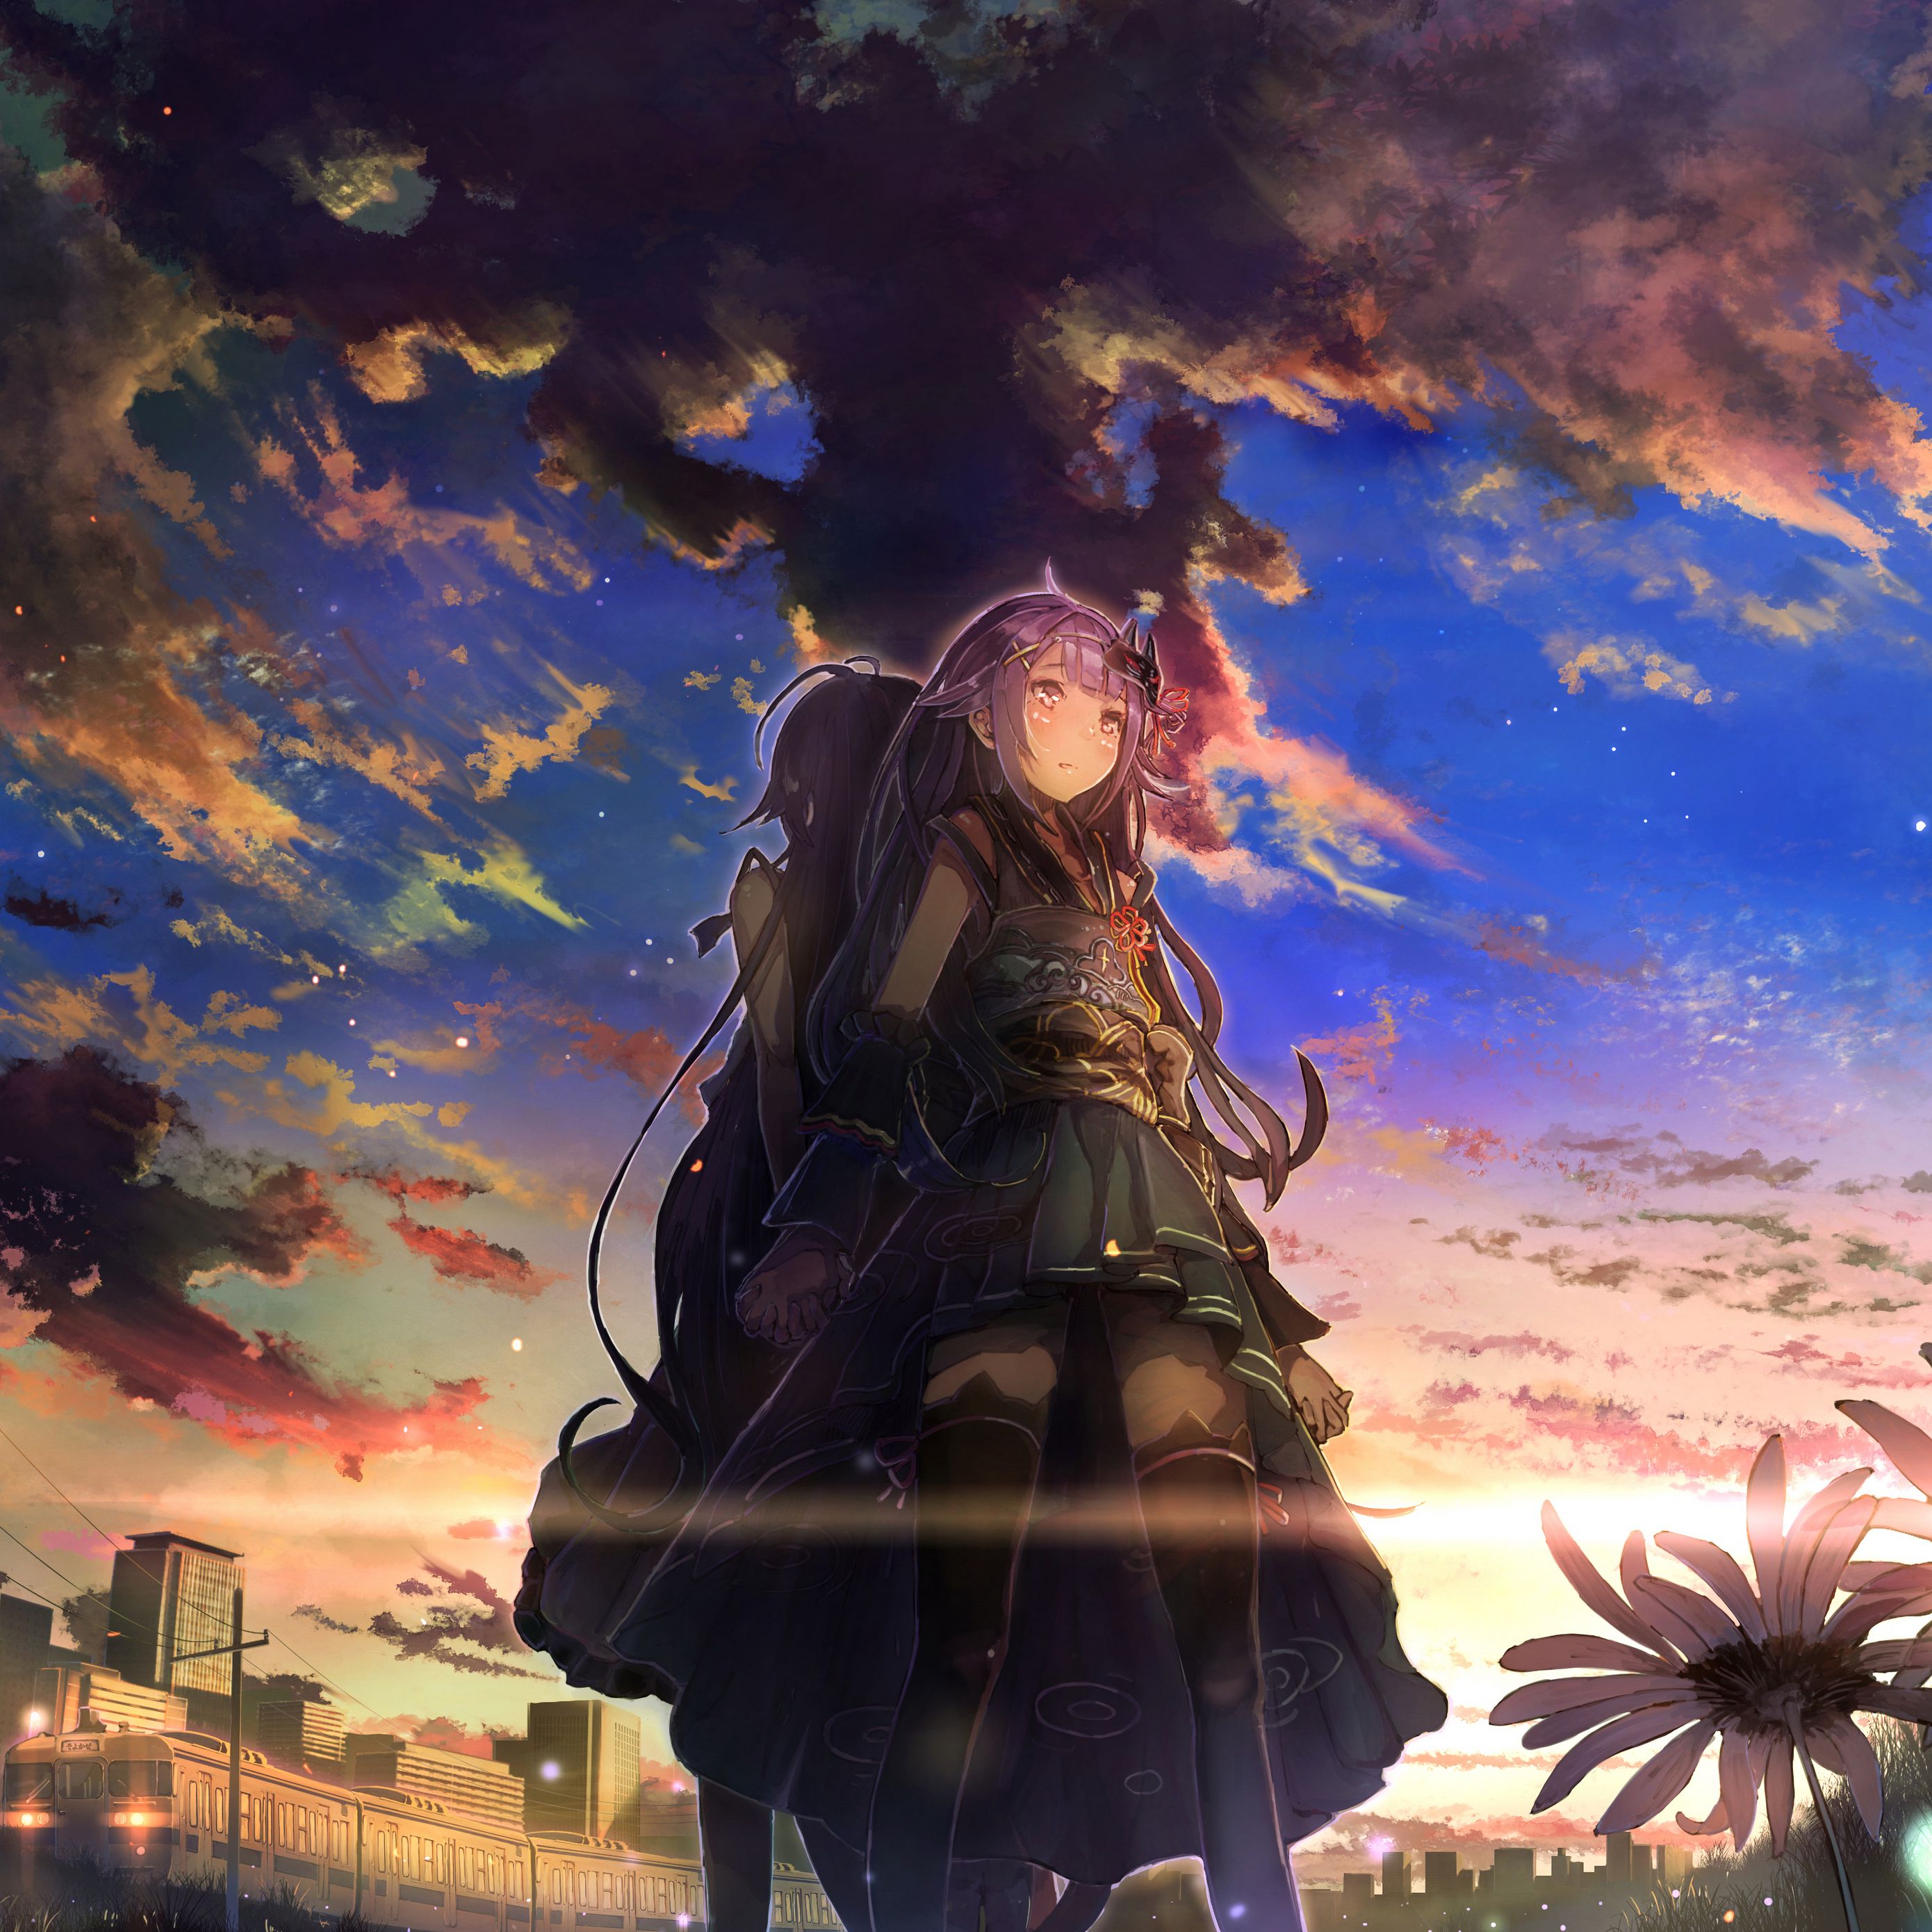 Download wallpaper 2780x2780 girls, touch, sky, clouds, sunset, anime ipad air, ipad air ipad ipad ipad mini ipad mini ipad mini ipad pro 9.7 for parallax HD background